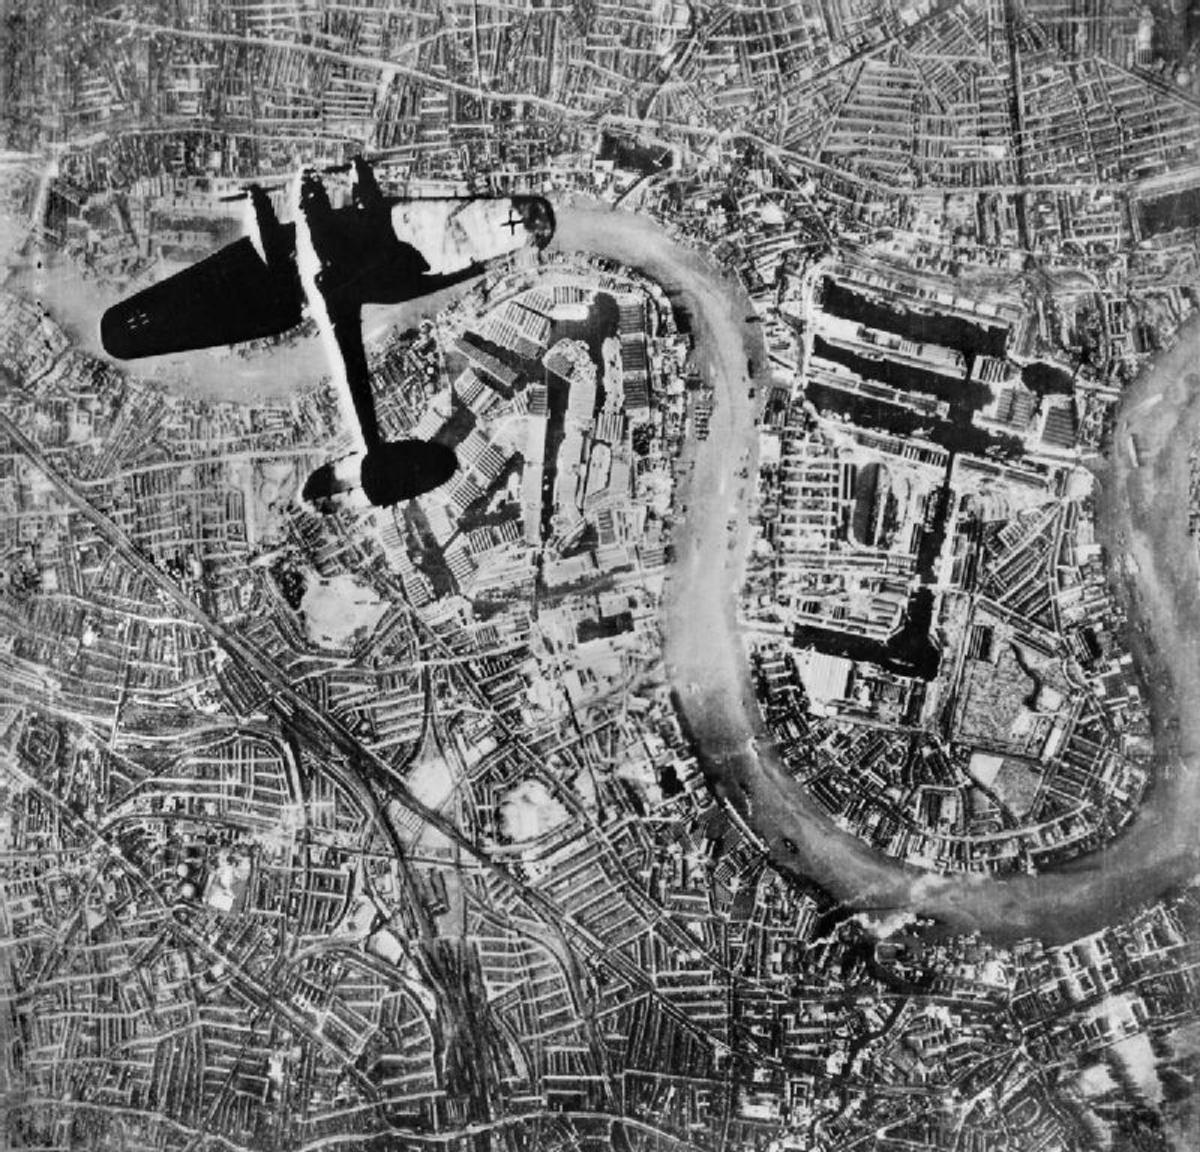 A Heinkel He 111 bomber over London on 7 September 1940, the loop in the Thames visible.  The docks at the Isle of Dogs and Wapping are probably its target.